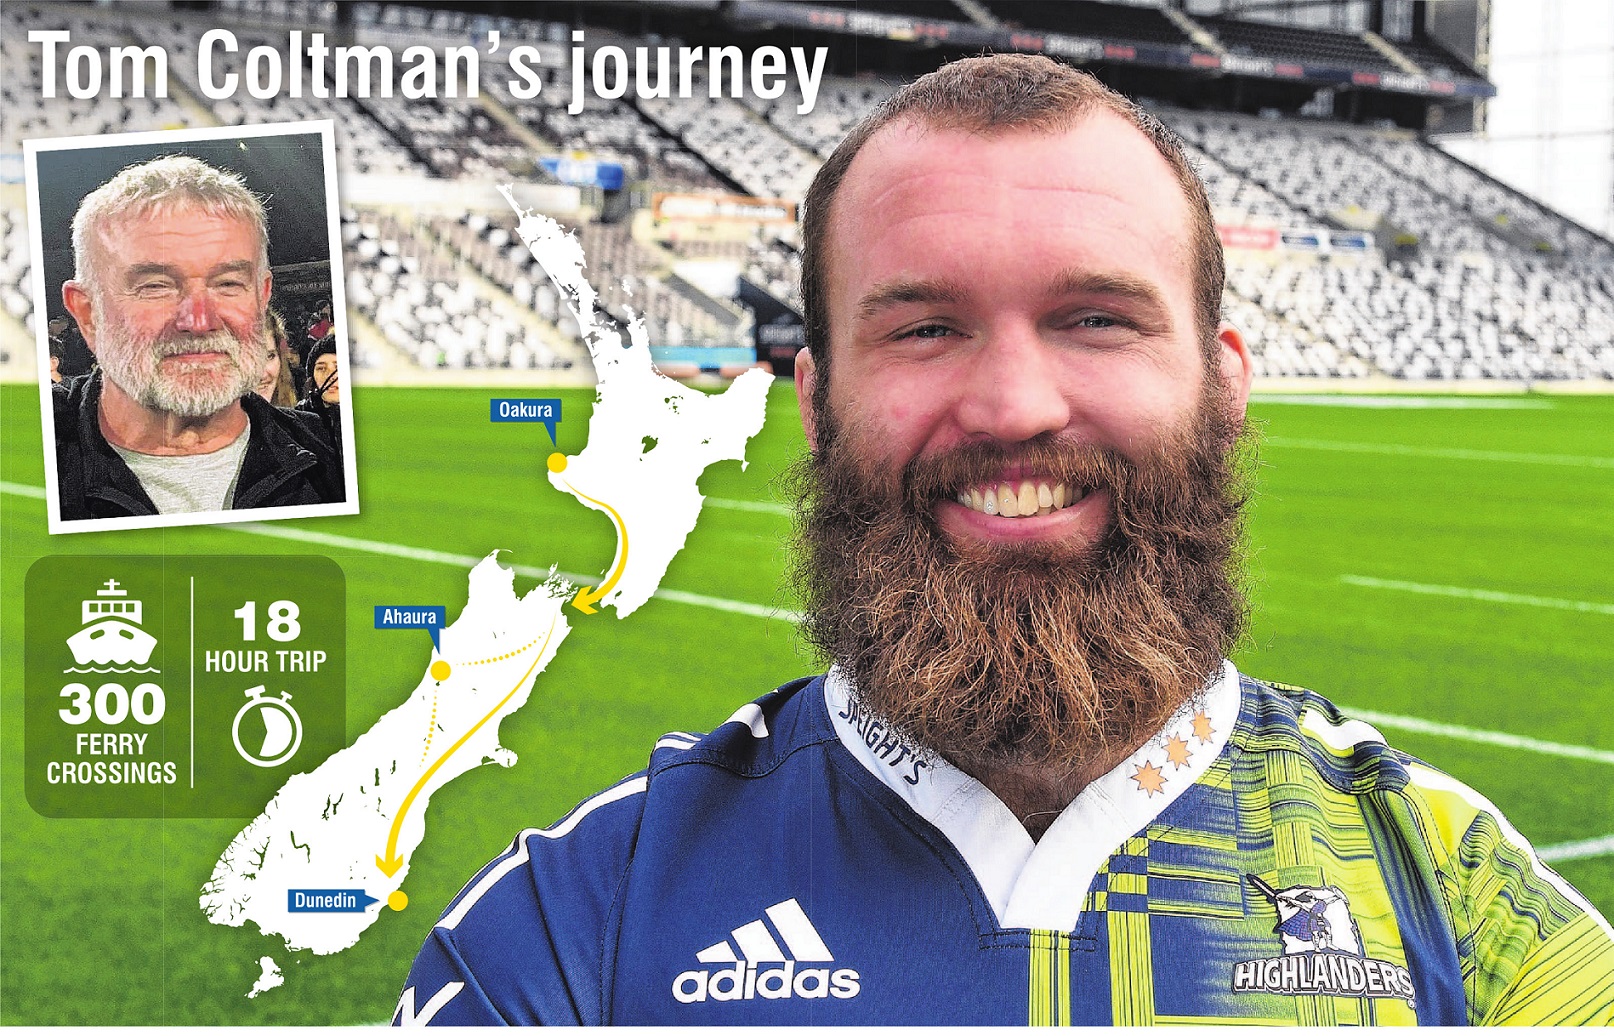 Highlander Liam Coltman’s father Tom has driven down from the North Island for the umpteenth time...